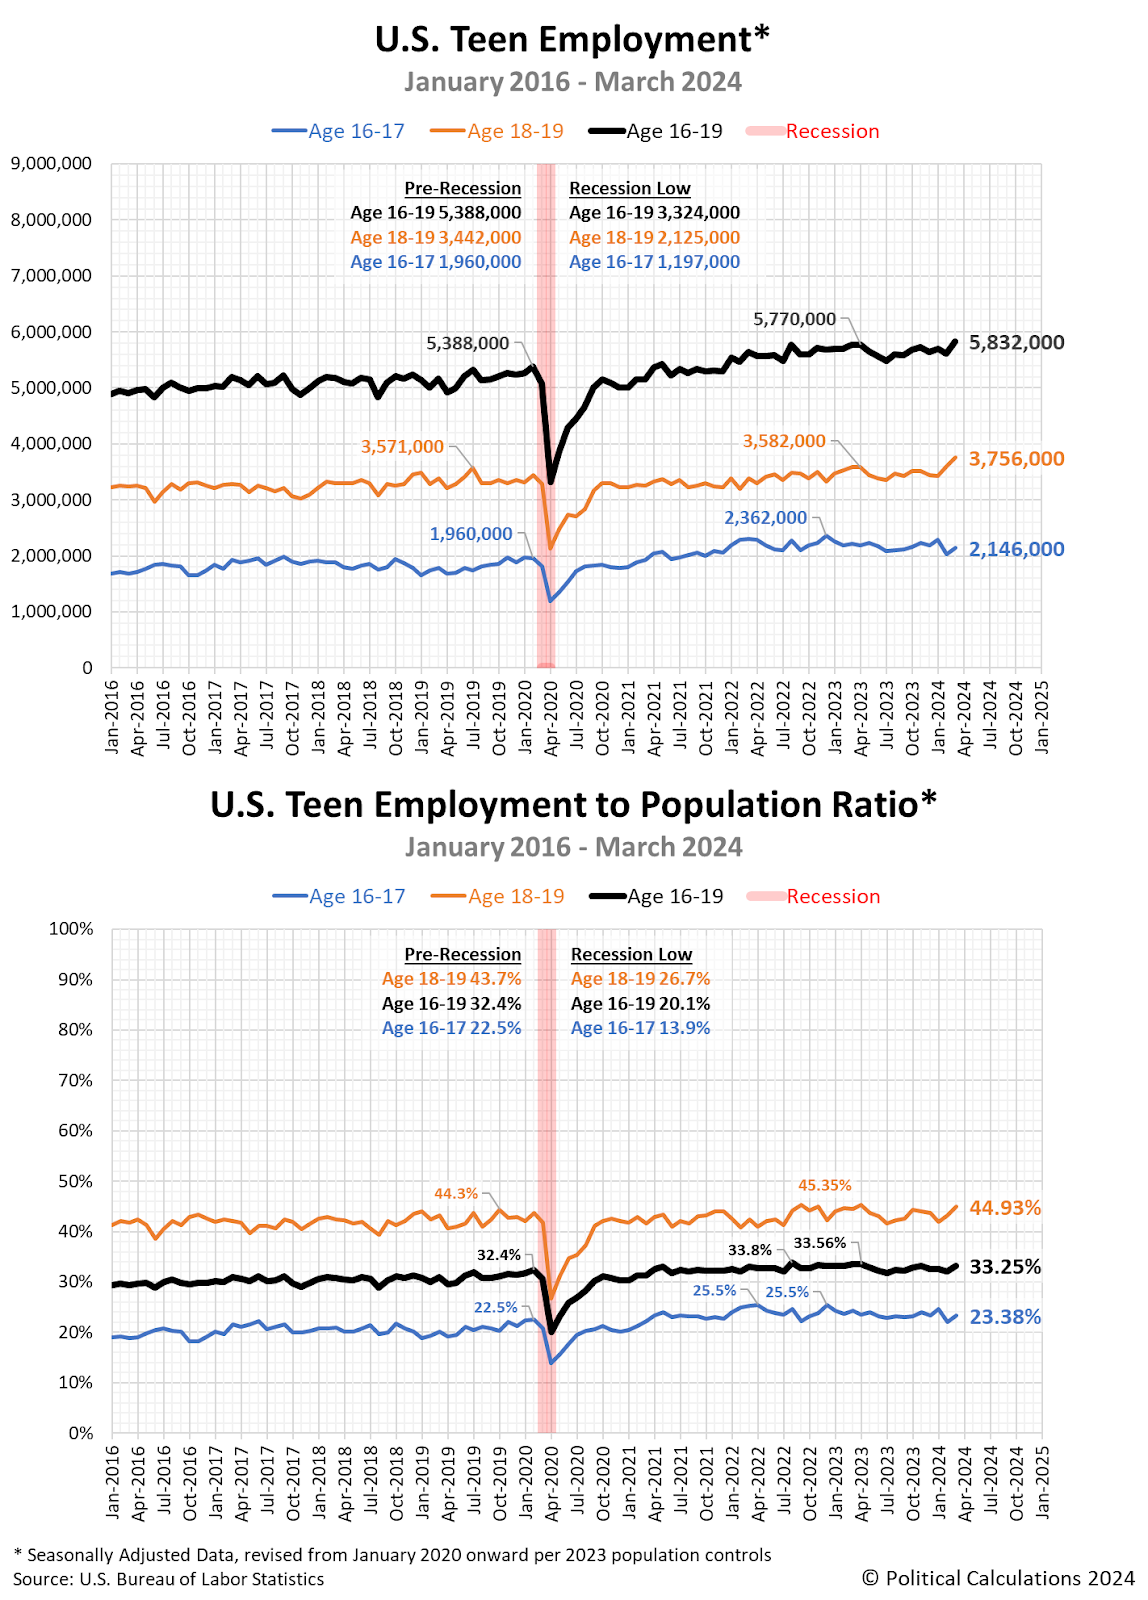 U.S. Teen Employment and Teen Employment to Population Ratio, January 2016 - March 2024